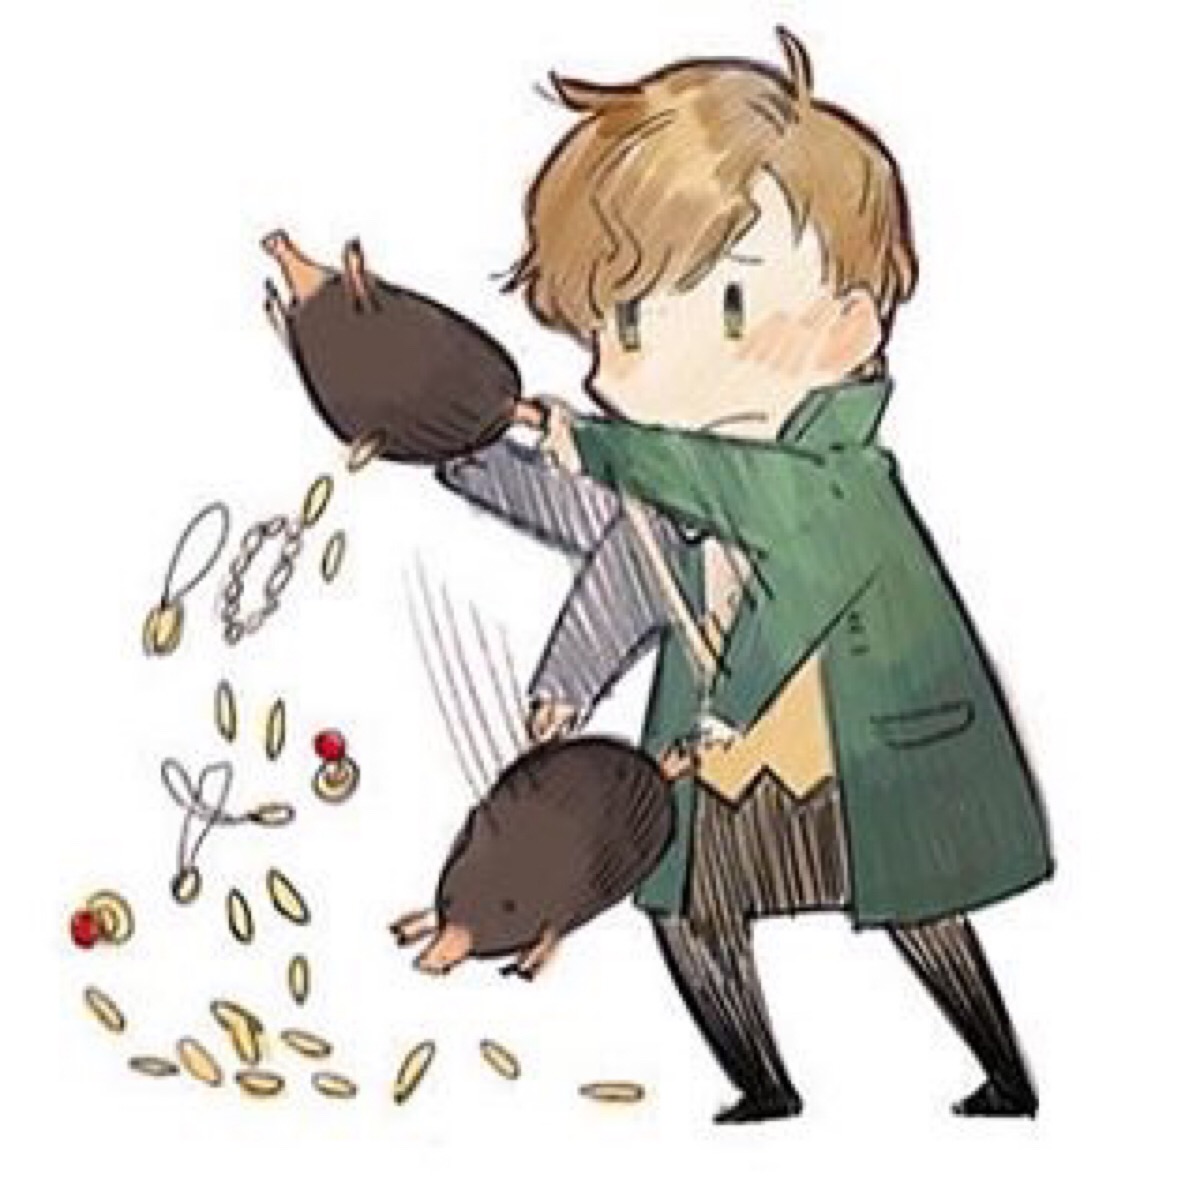 fantastic beasts and where to find them 《神奇动物在哪里》